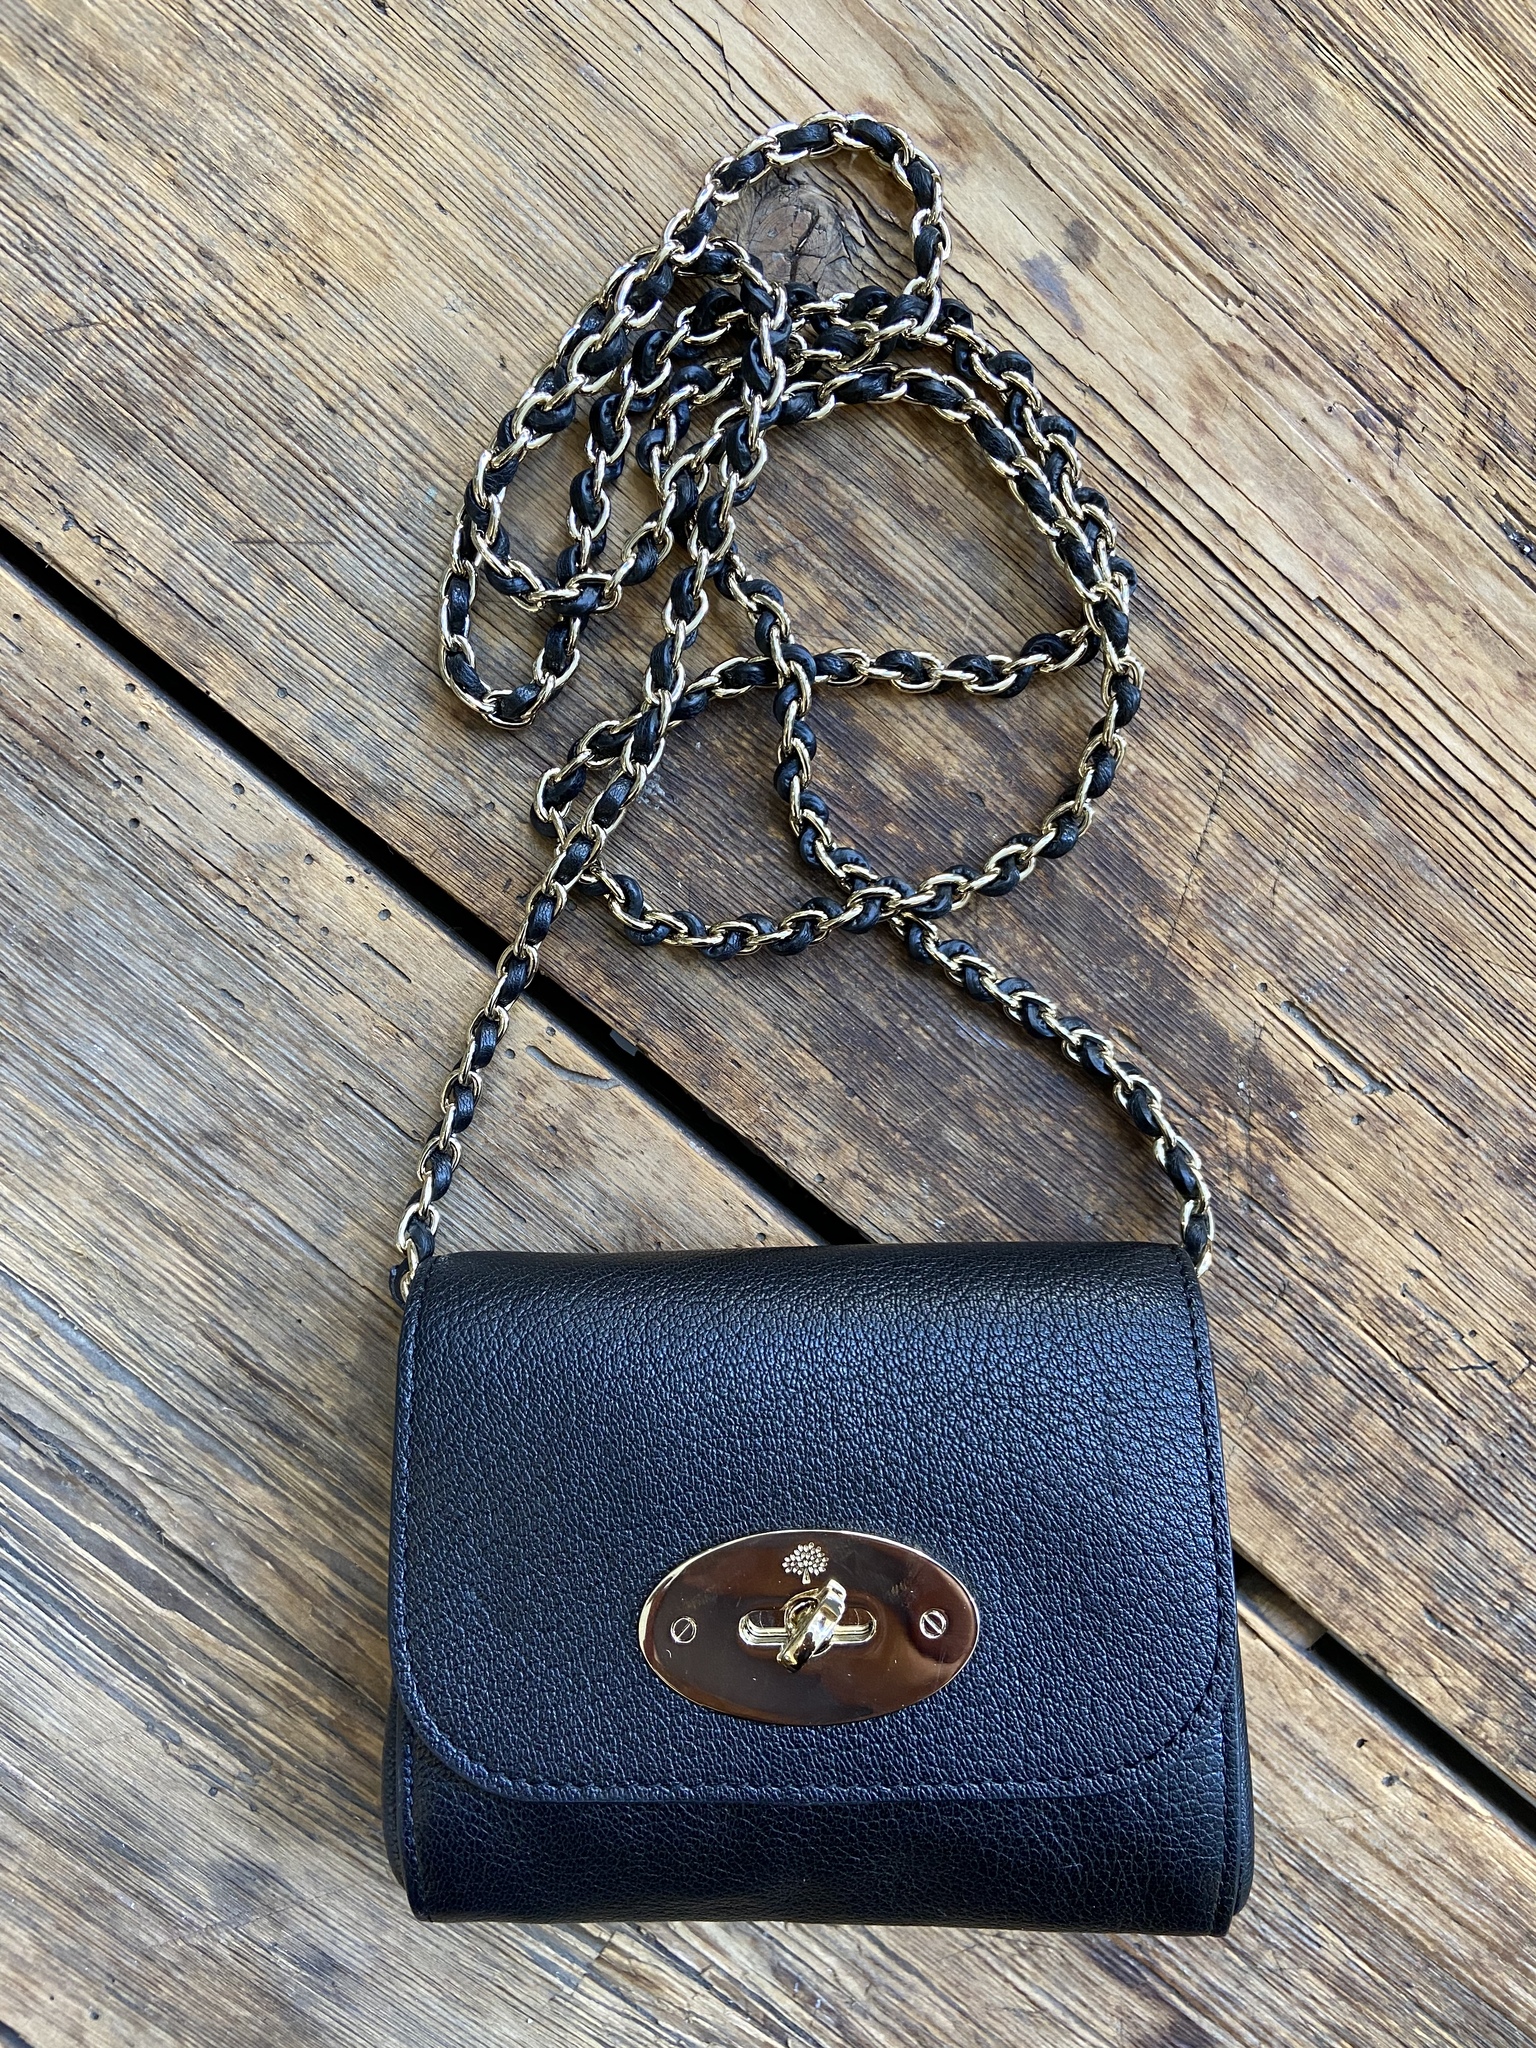 Mulberry mini Lily chain bag